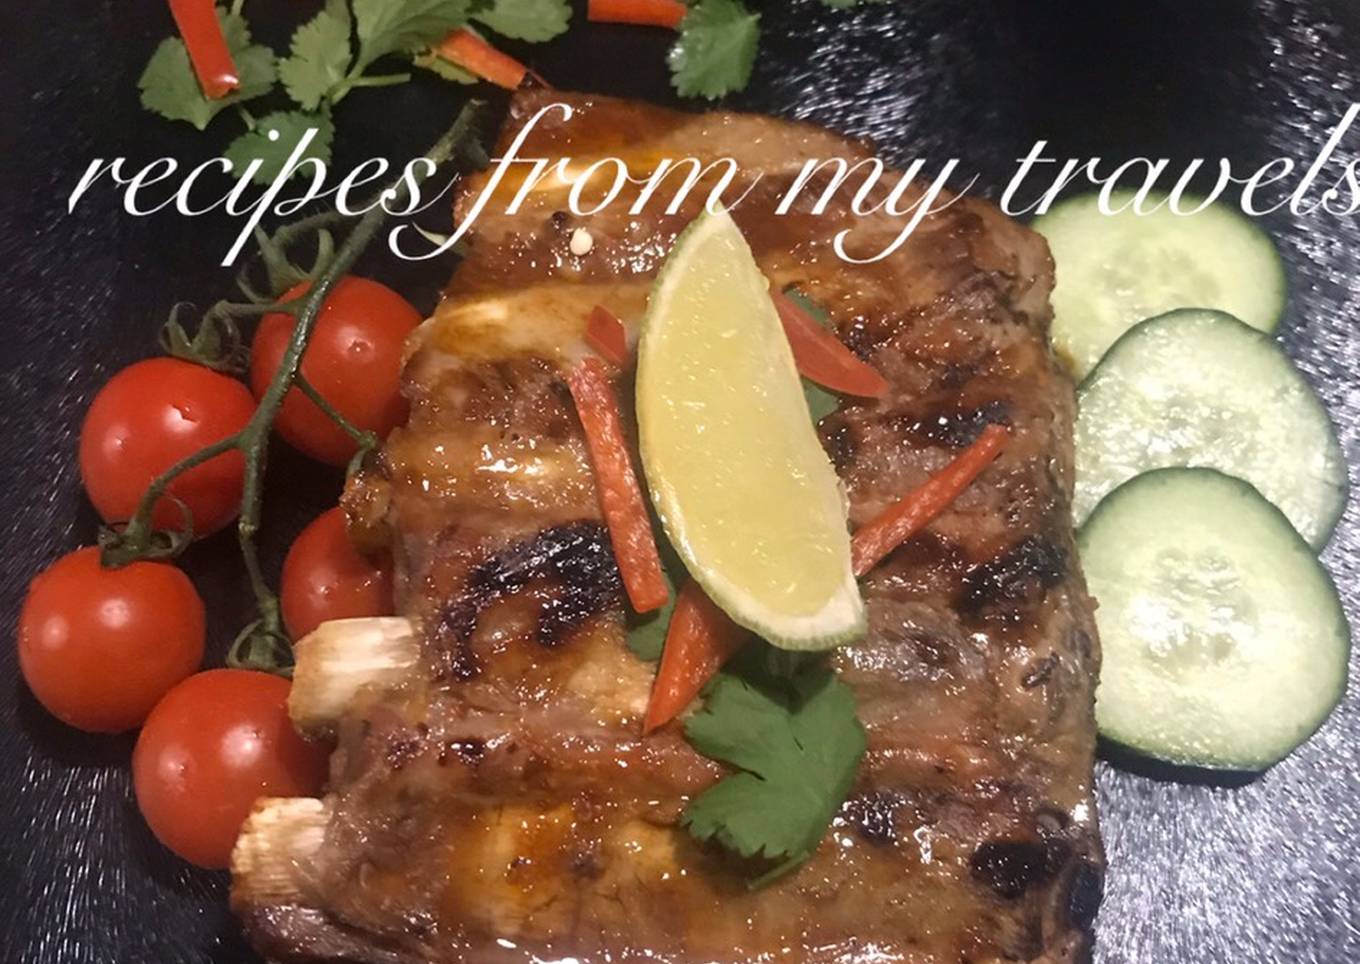 whisky non alcoholic infused pork ribs with chilli lime glaze